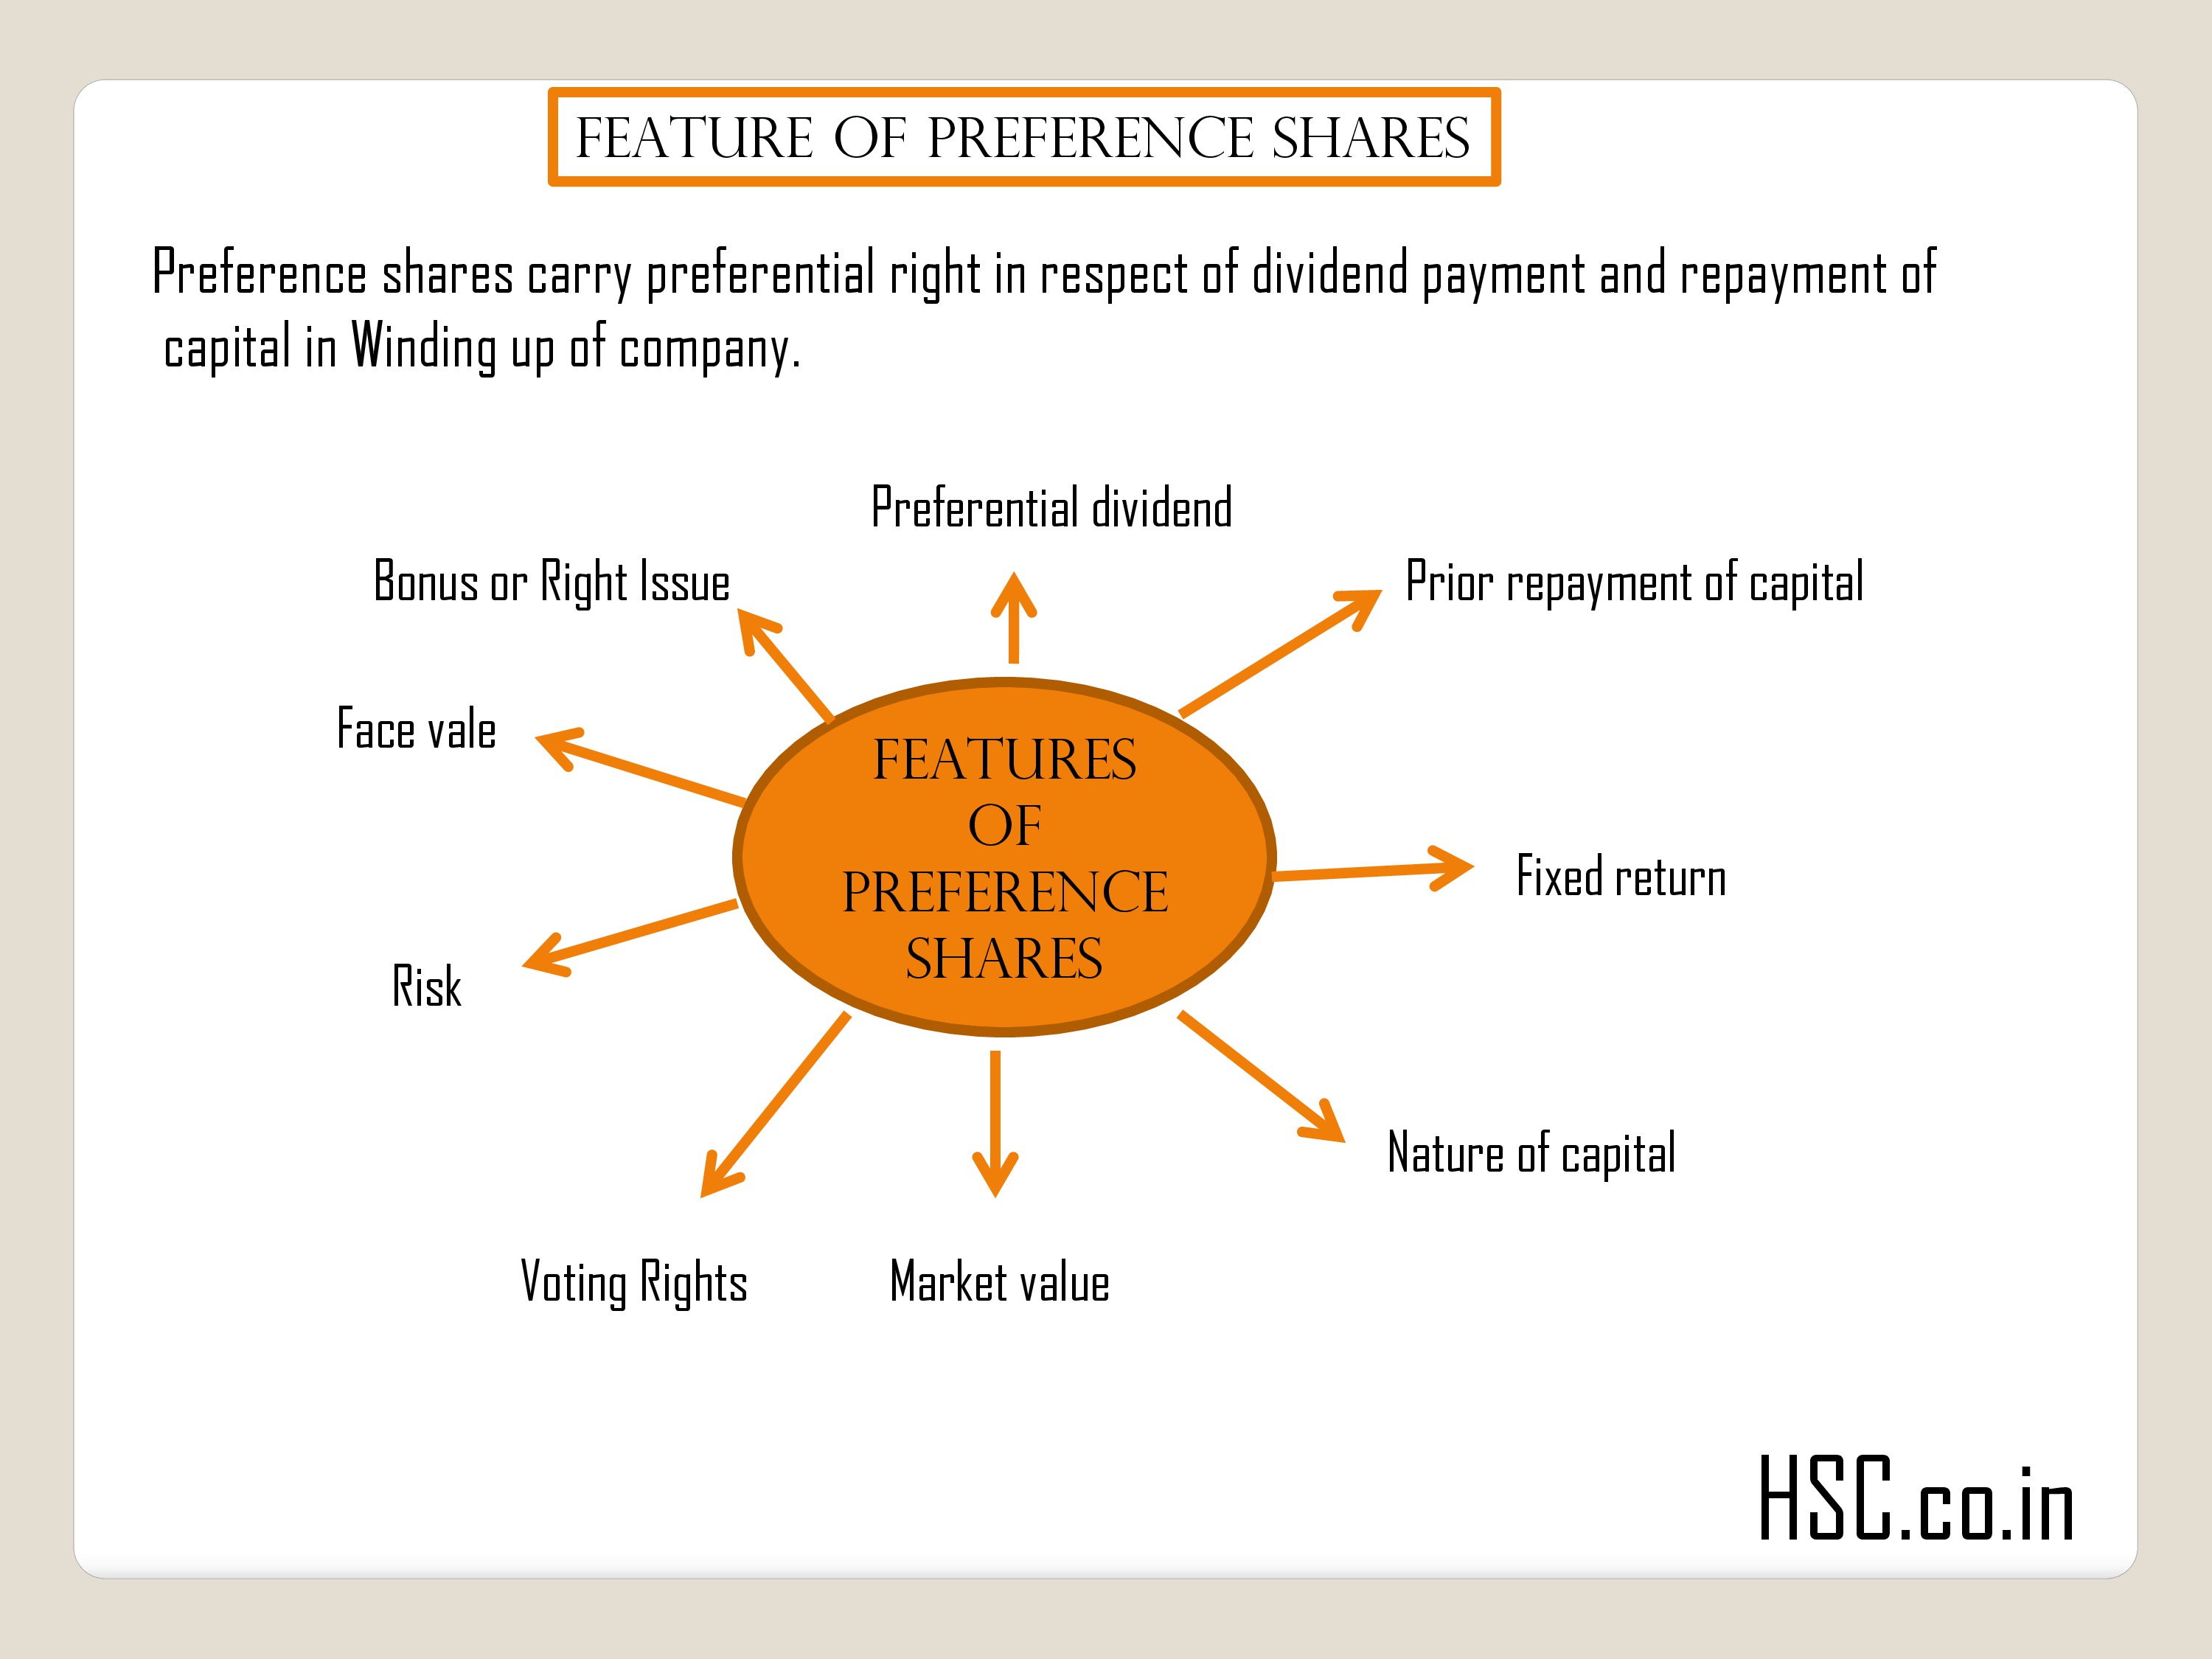 Feature of preference shares